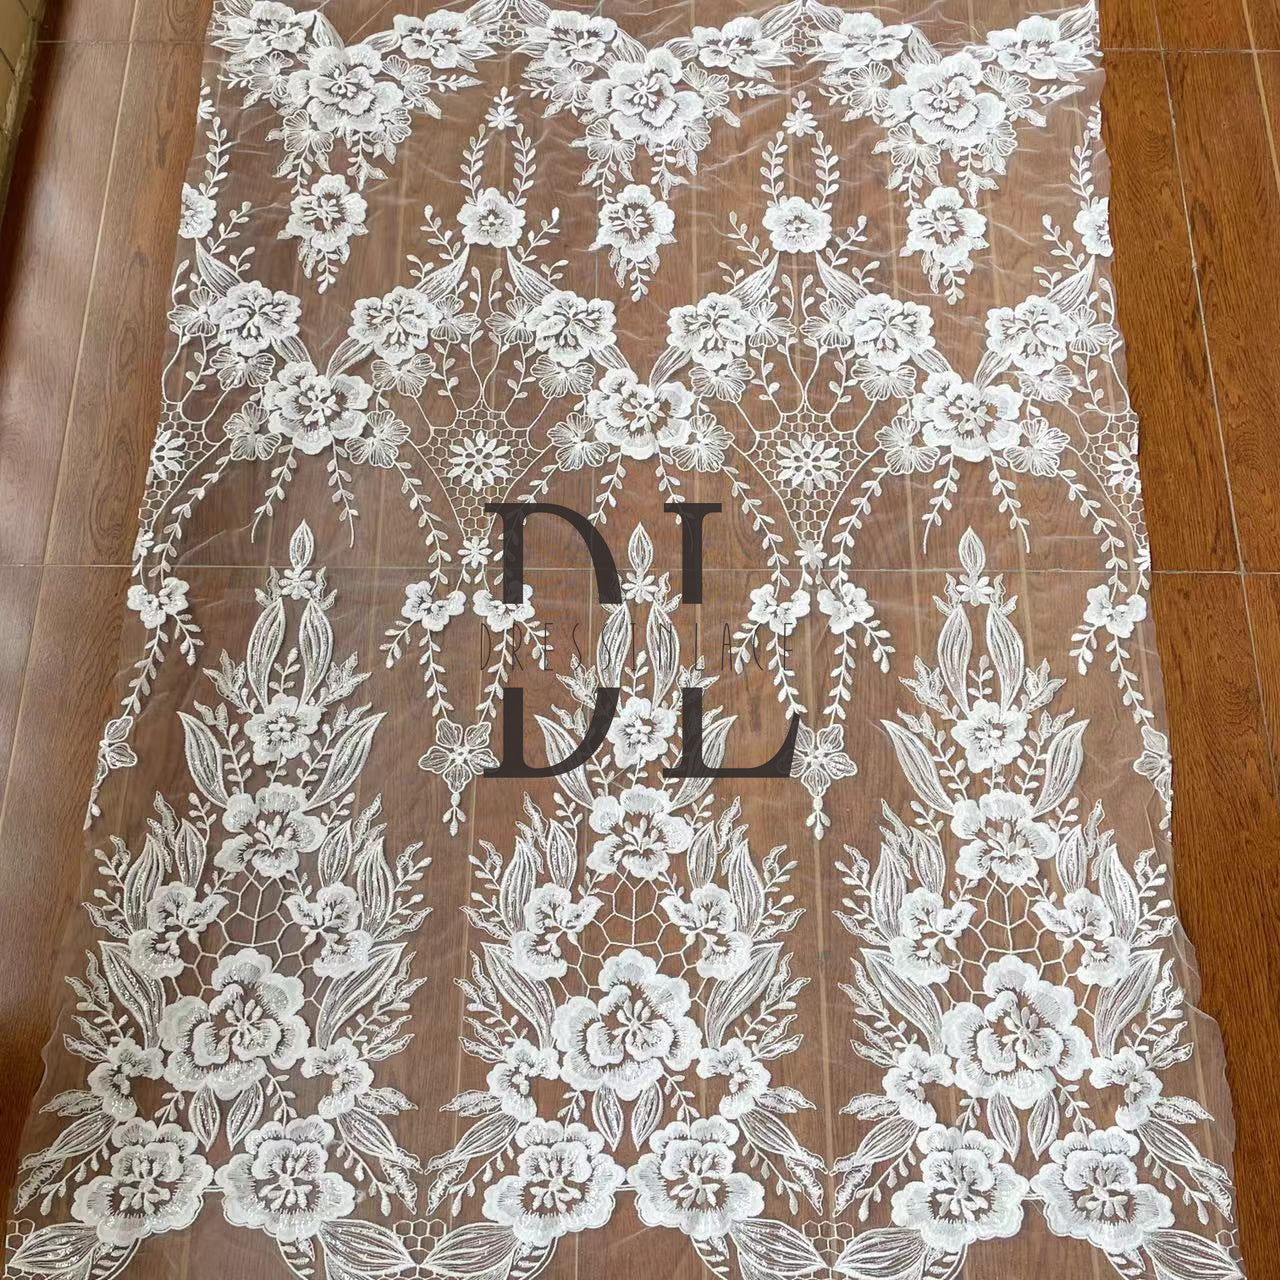 DL130096 Elegant Shiny Sequins Flowers Lace Fabric - Lovely Flower Pattern for a Stunning Look DL130096